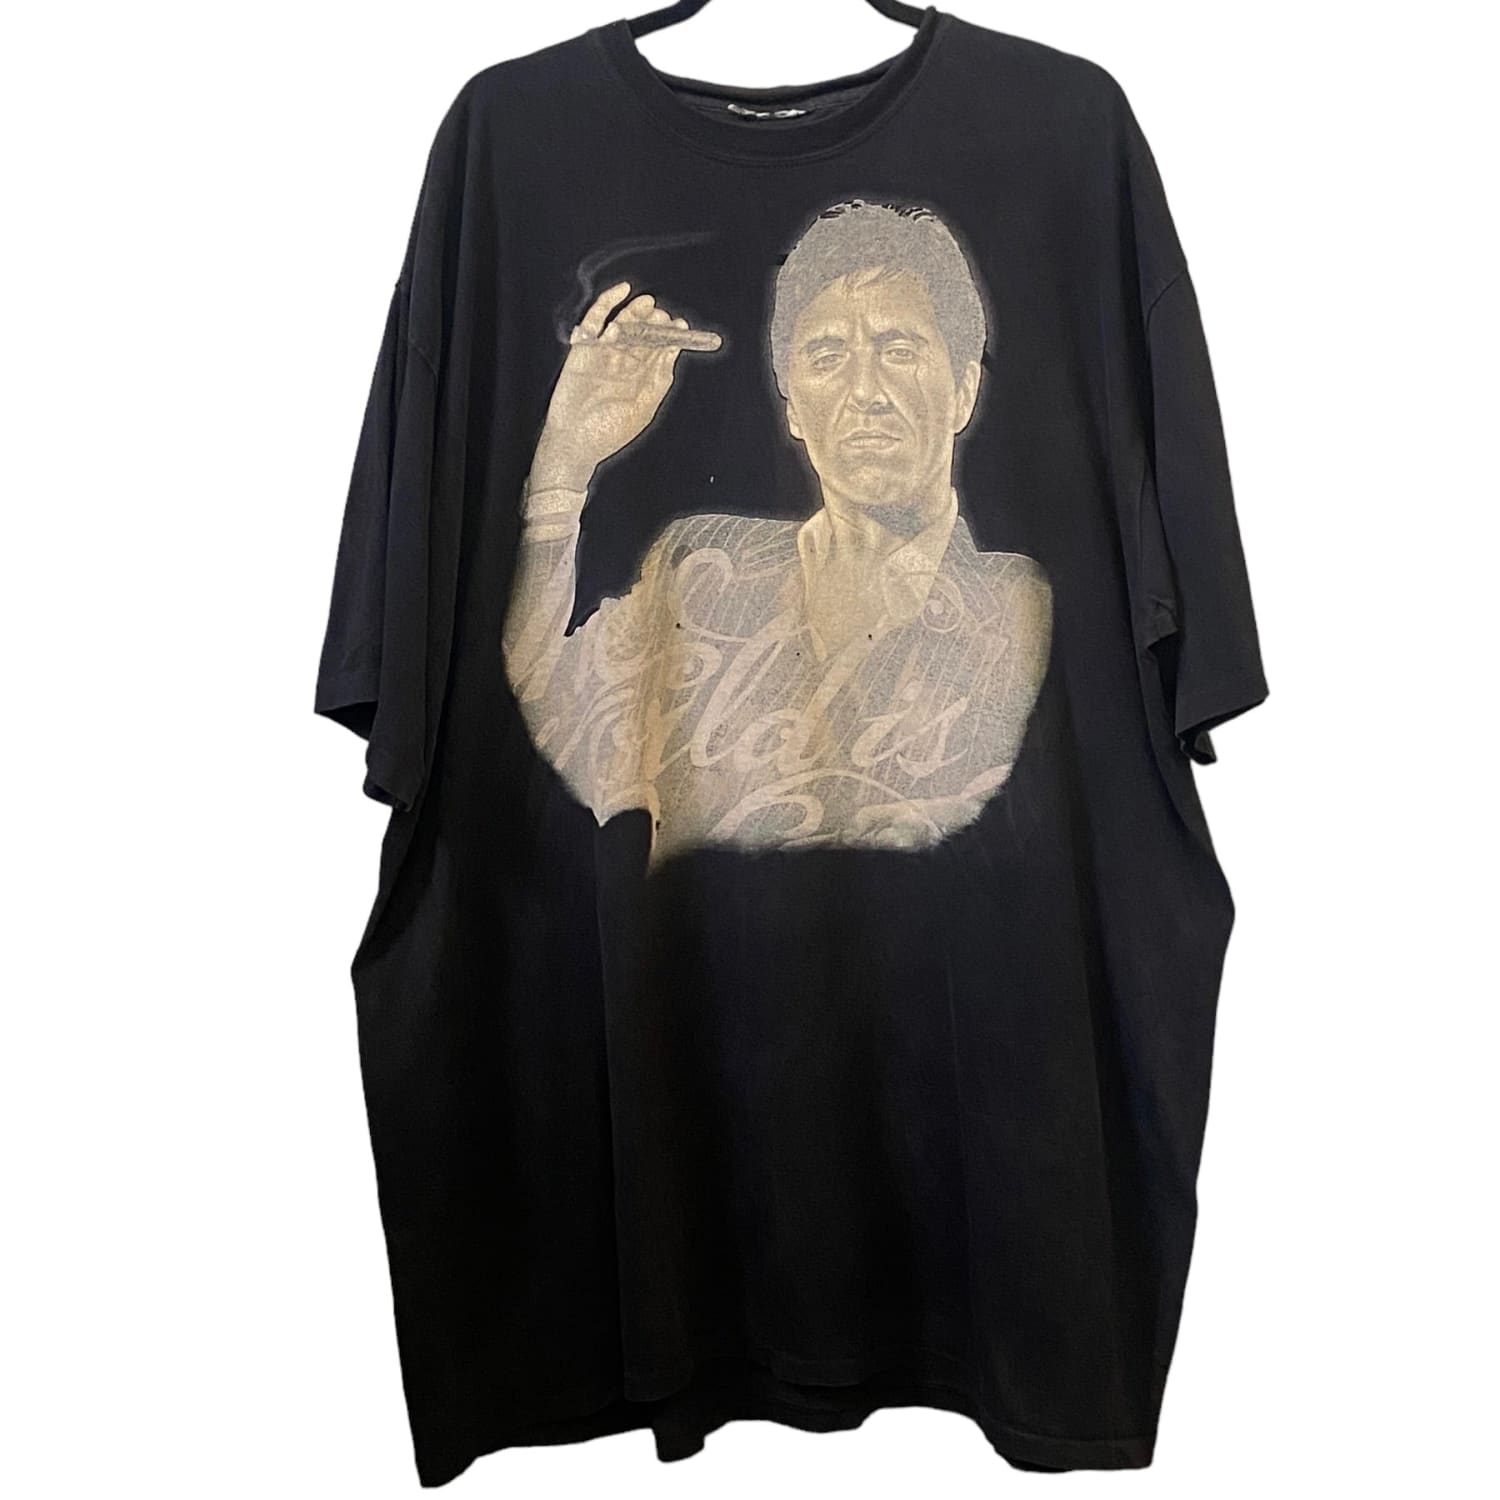 Vintage Scarface Silhouette Shirt